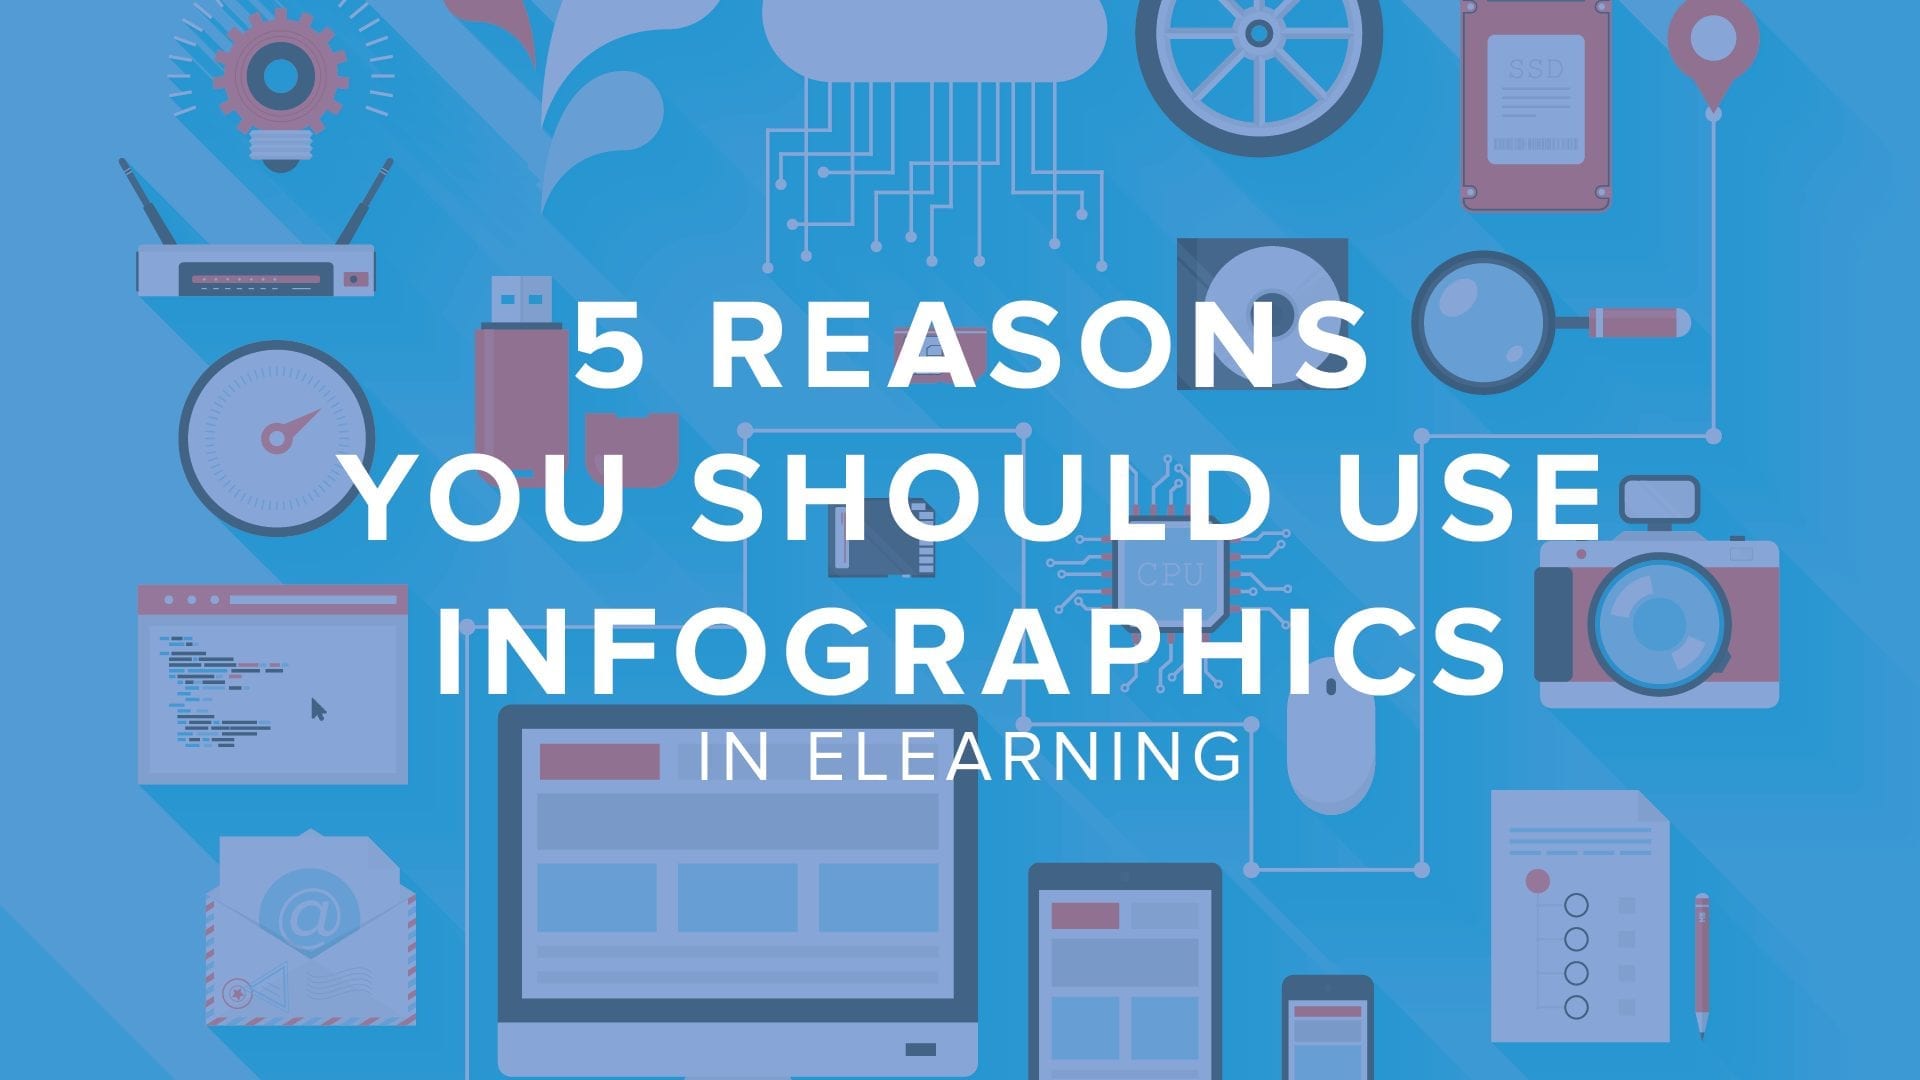 DigitalChalk: 5 Reasons You Should Use Infographics in eLearning